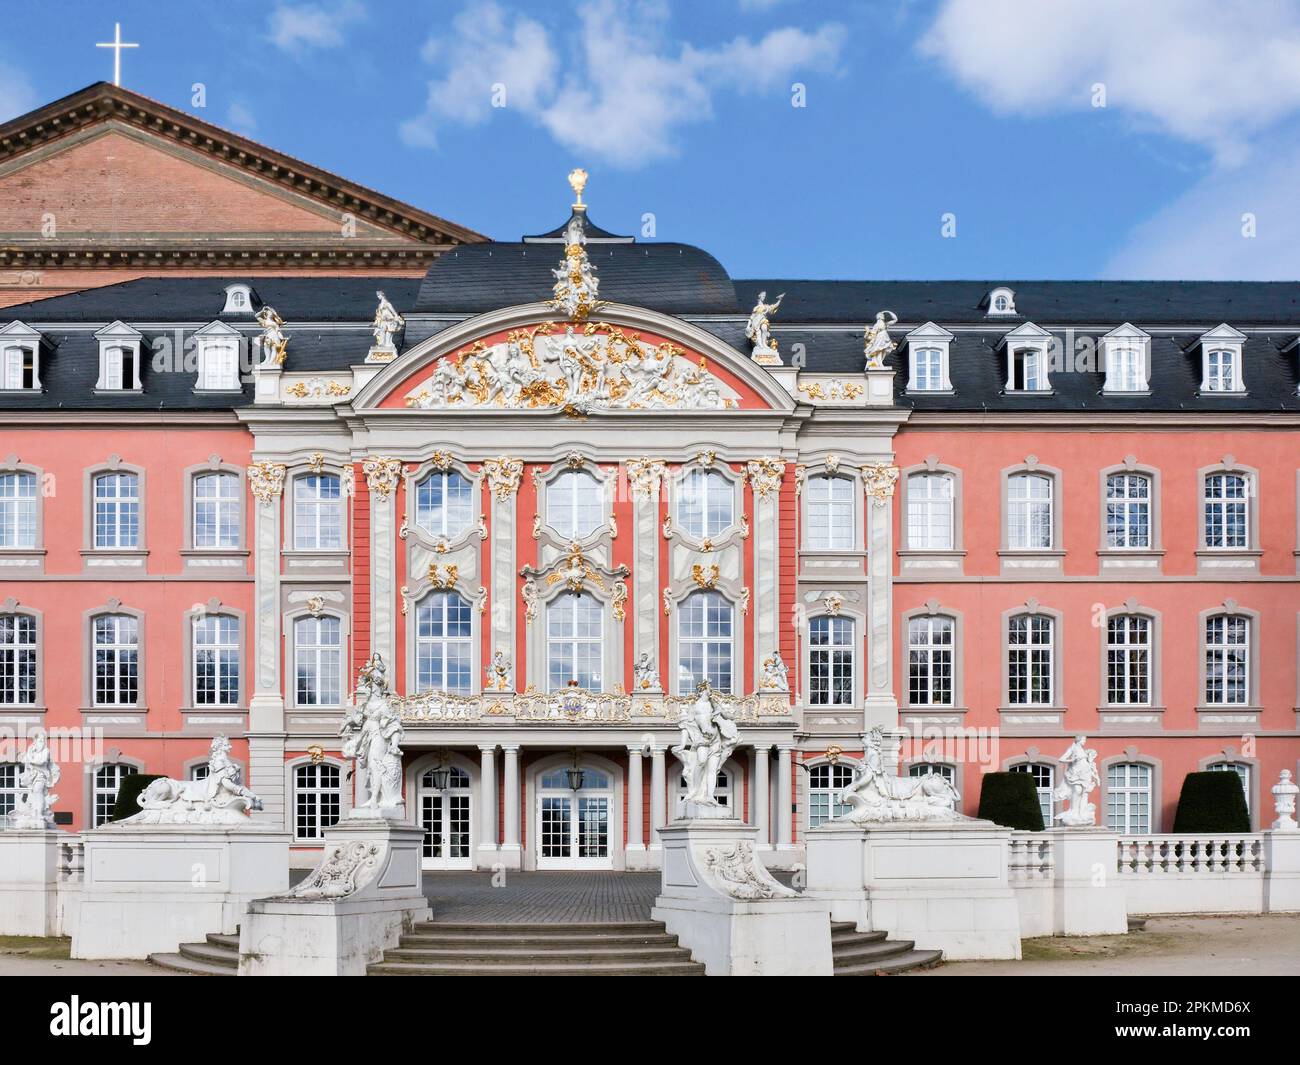 The Electoral Palace,German: Kurfürstliches Palais, in Trier, Germany, was the residence of the Archbishops and Electors of Trier from the 16th centur Stock Photo